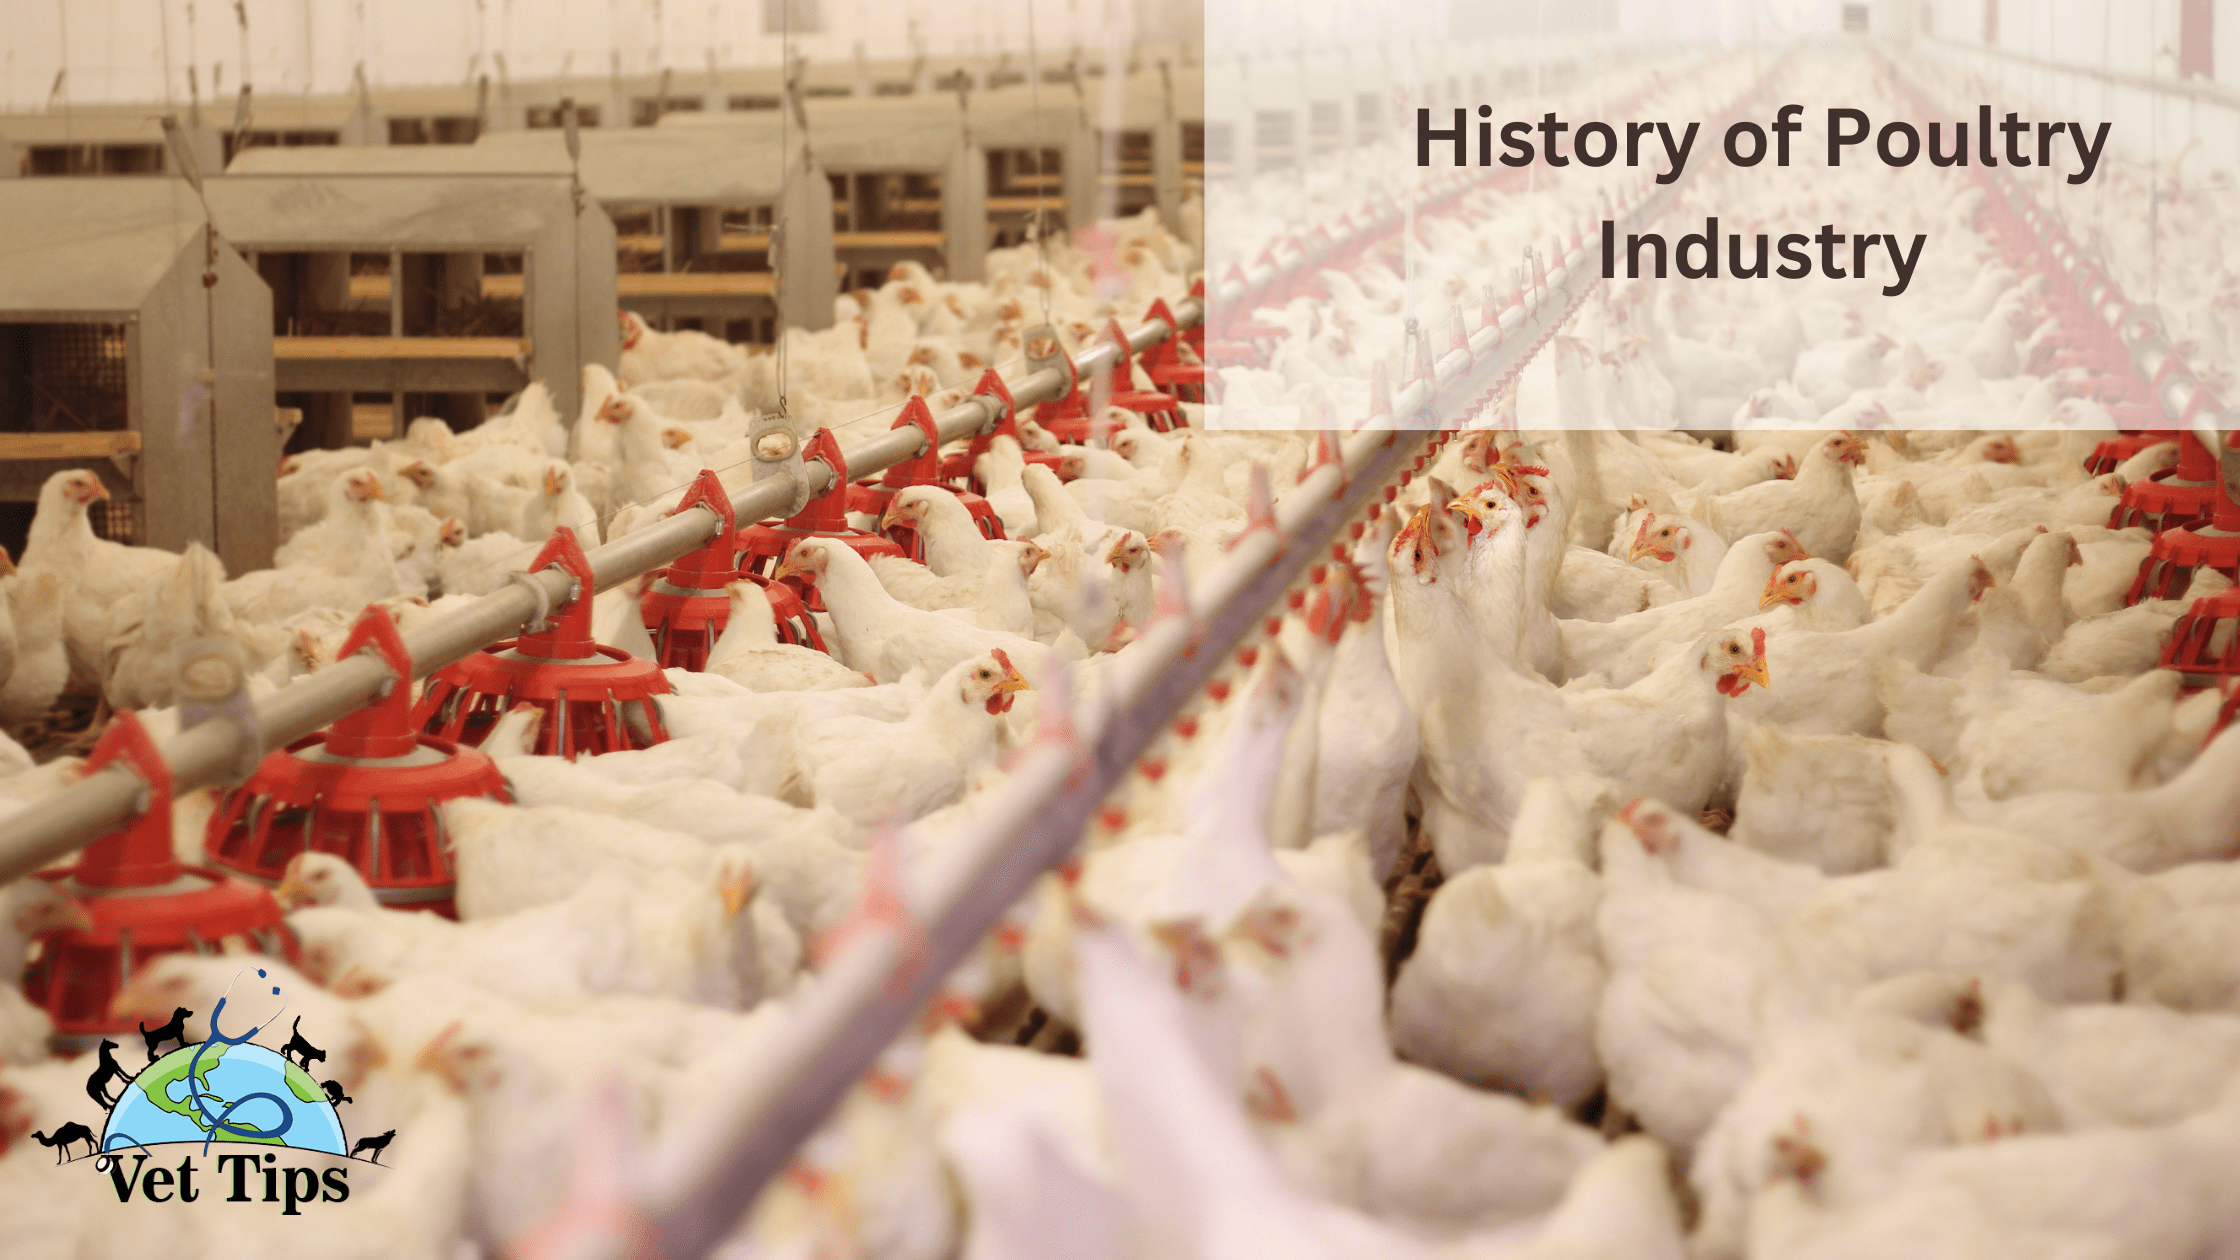 History of Poultry Industry